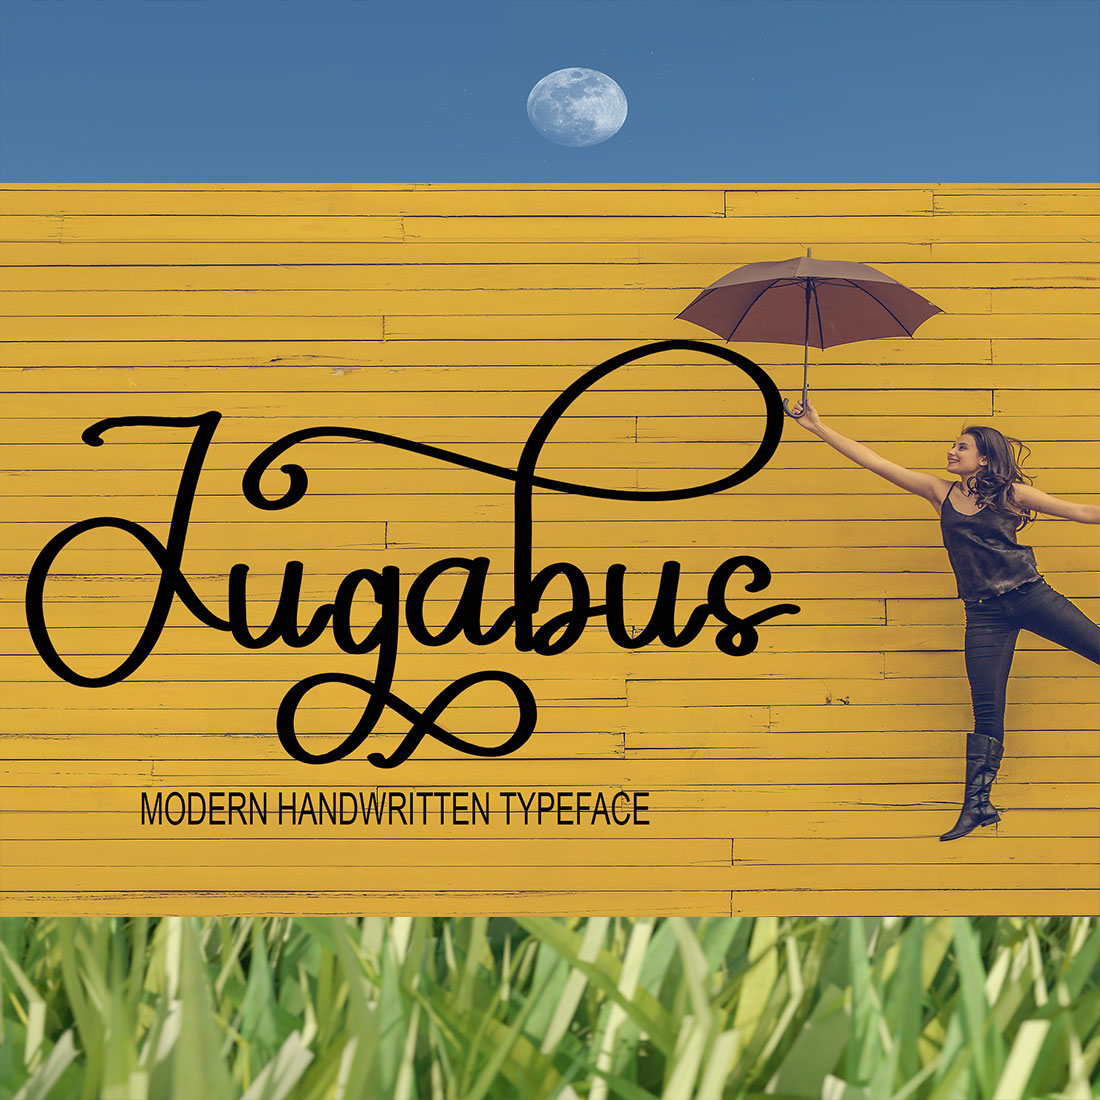 Cover of the gorgeous Jugabus font.